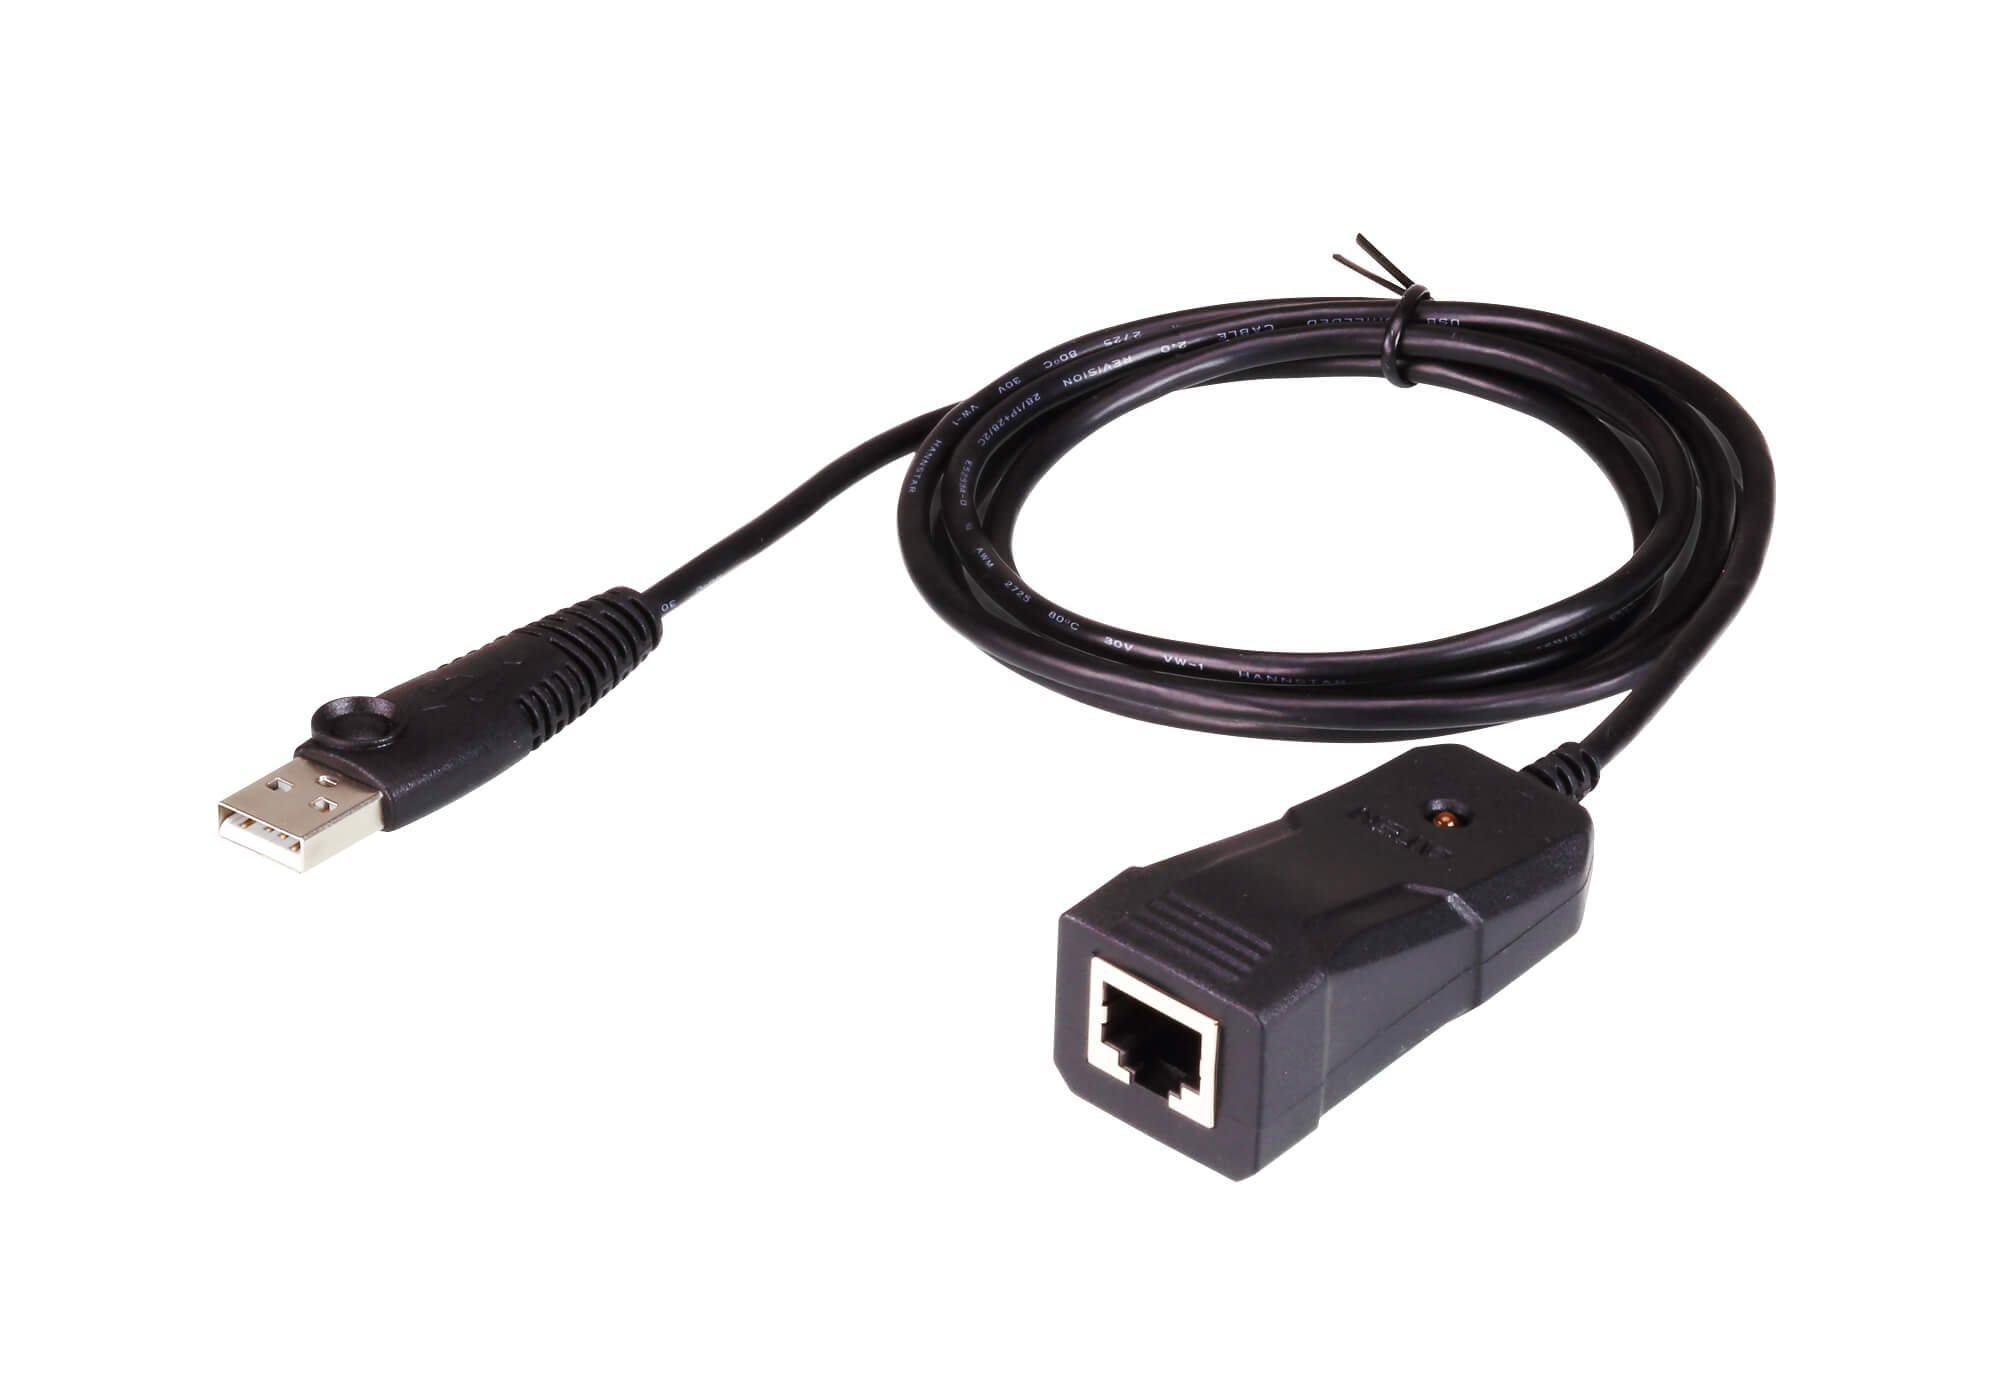 Aten USB RJ-45 (RS-232) Console Adapter. | Comms Express